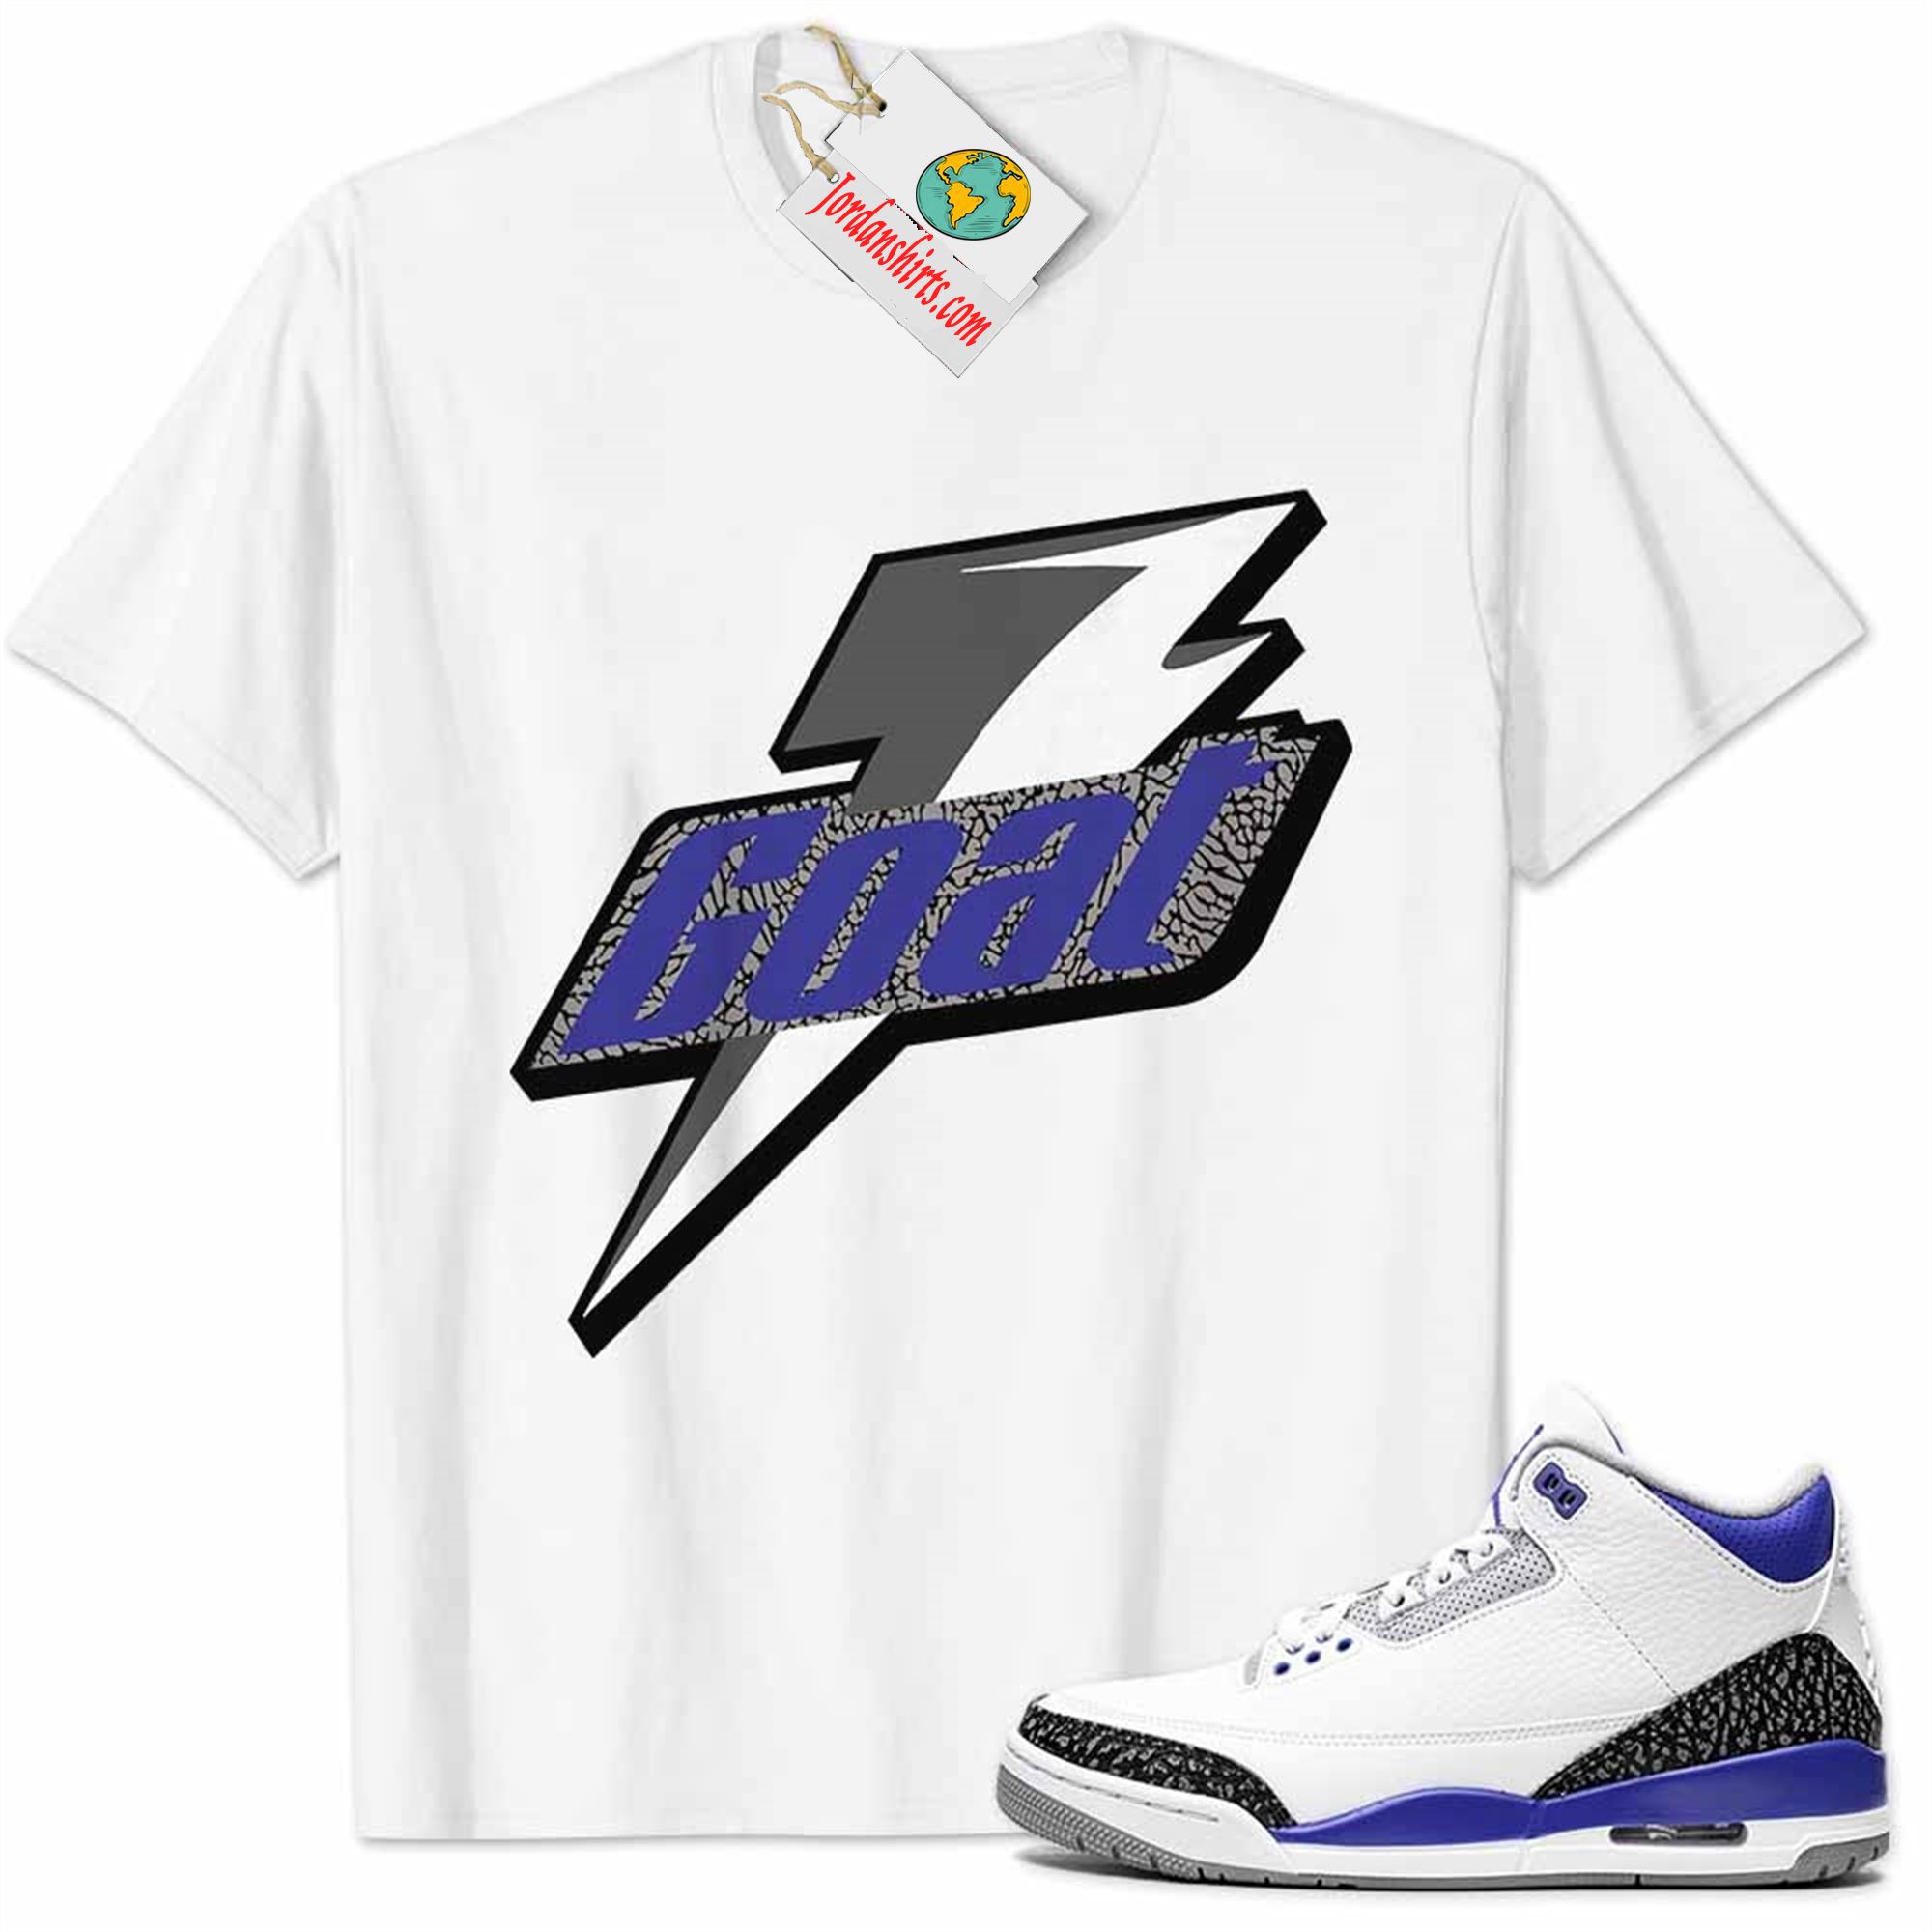 Jordan 3 Shirt, Racer Blue 3s Shirt Goat Greatest Of All Time White Size Up To 5xl